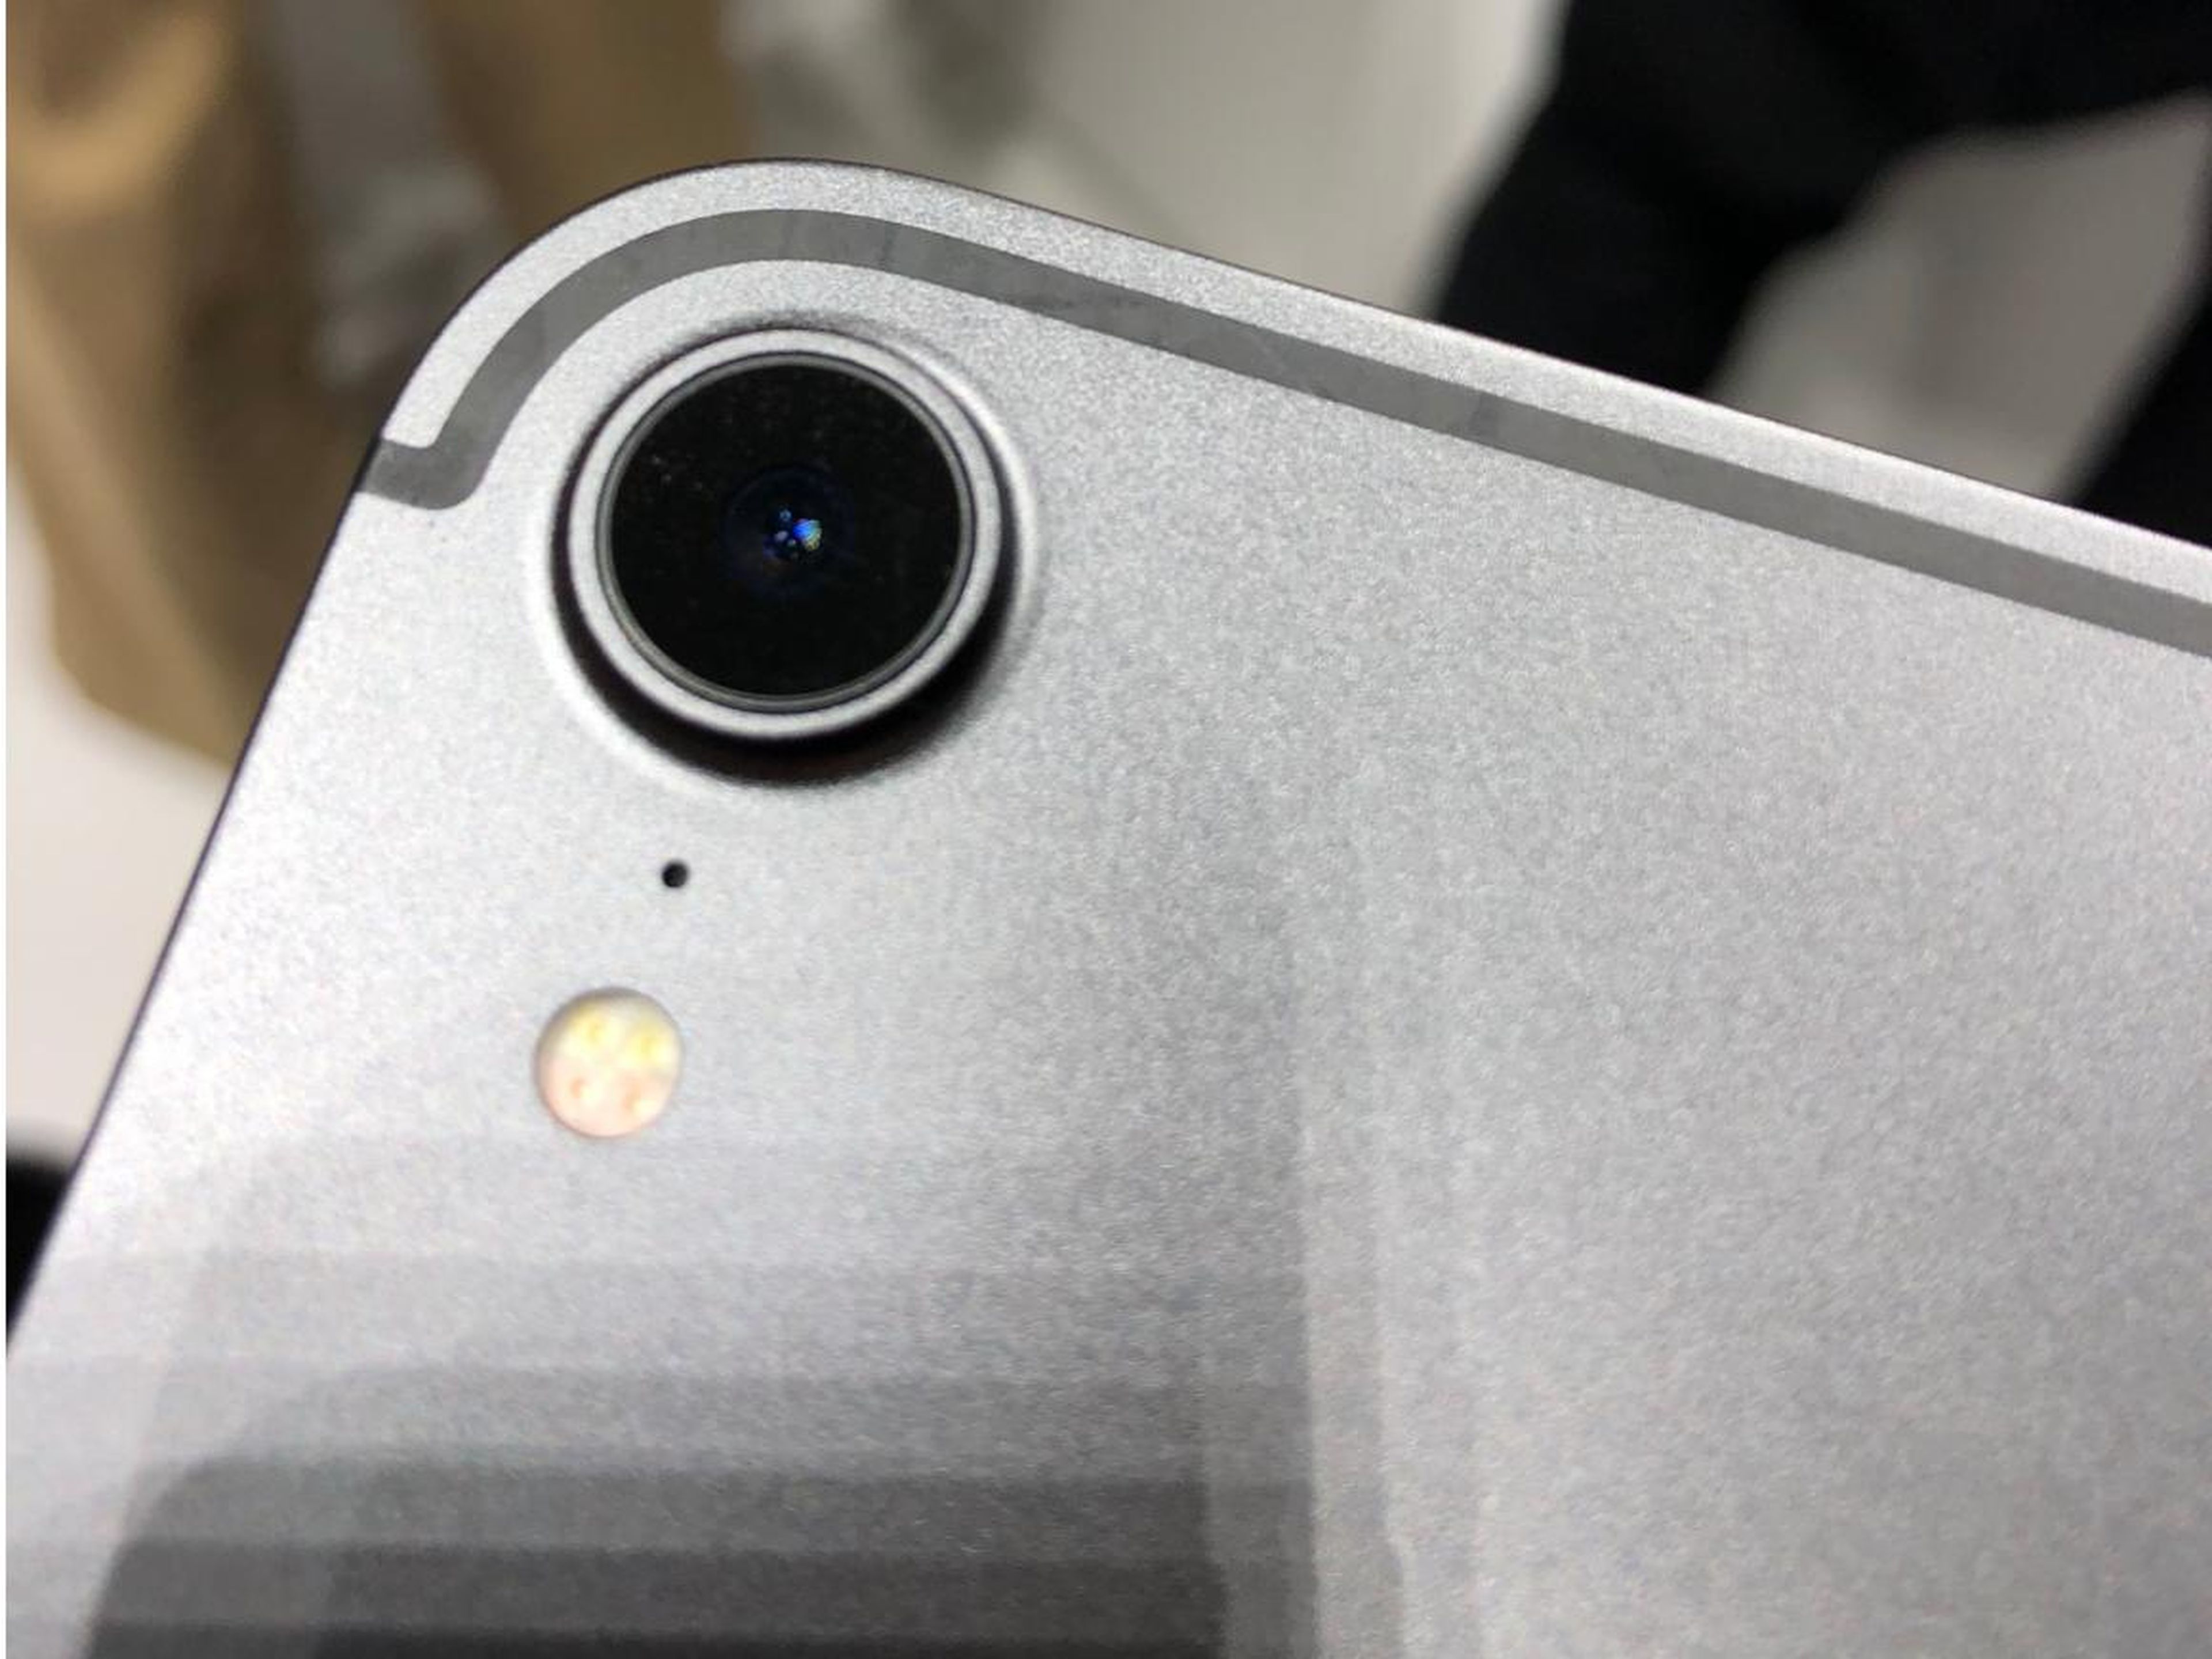 On the back side, we have a big camera lens that looks a lot like what you'd find on the iPhone XR. The antenna lines are reminiscent of the iPhone 7.